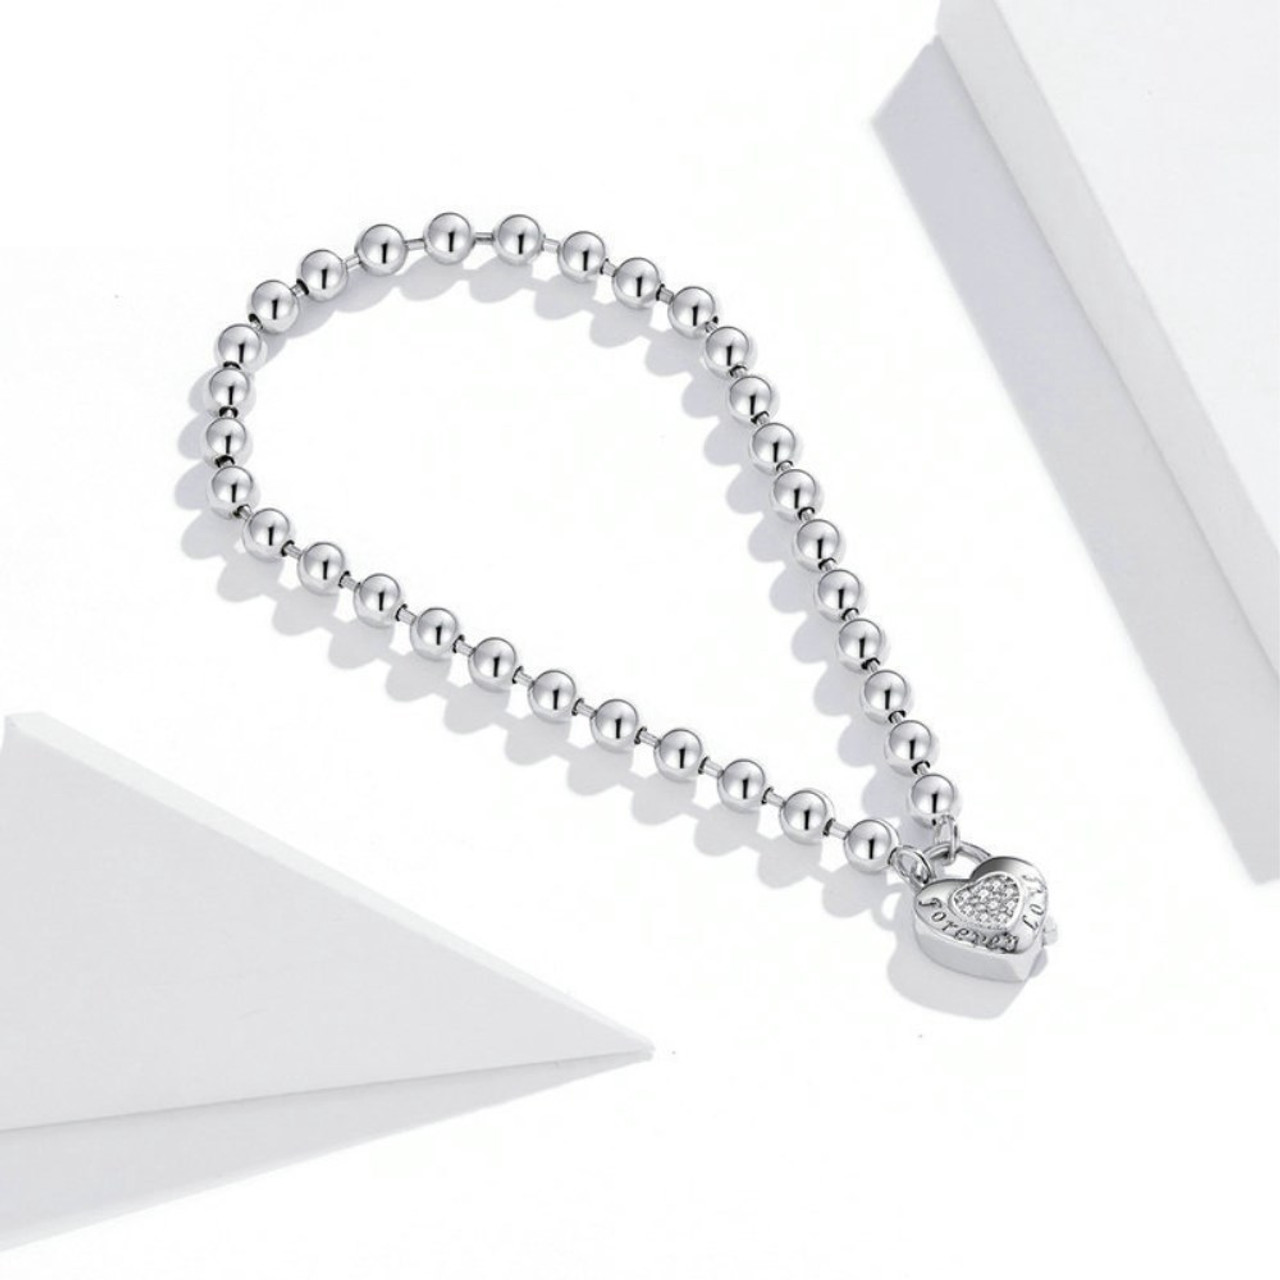 PORI JEWELERS .925 Sterling Silver Heart Charm Bracelet - For Women and  Girls - Toggle Lock - 7.5, 7.5 inches, Metal